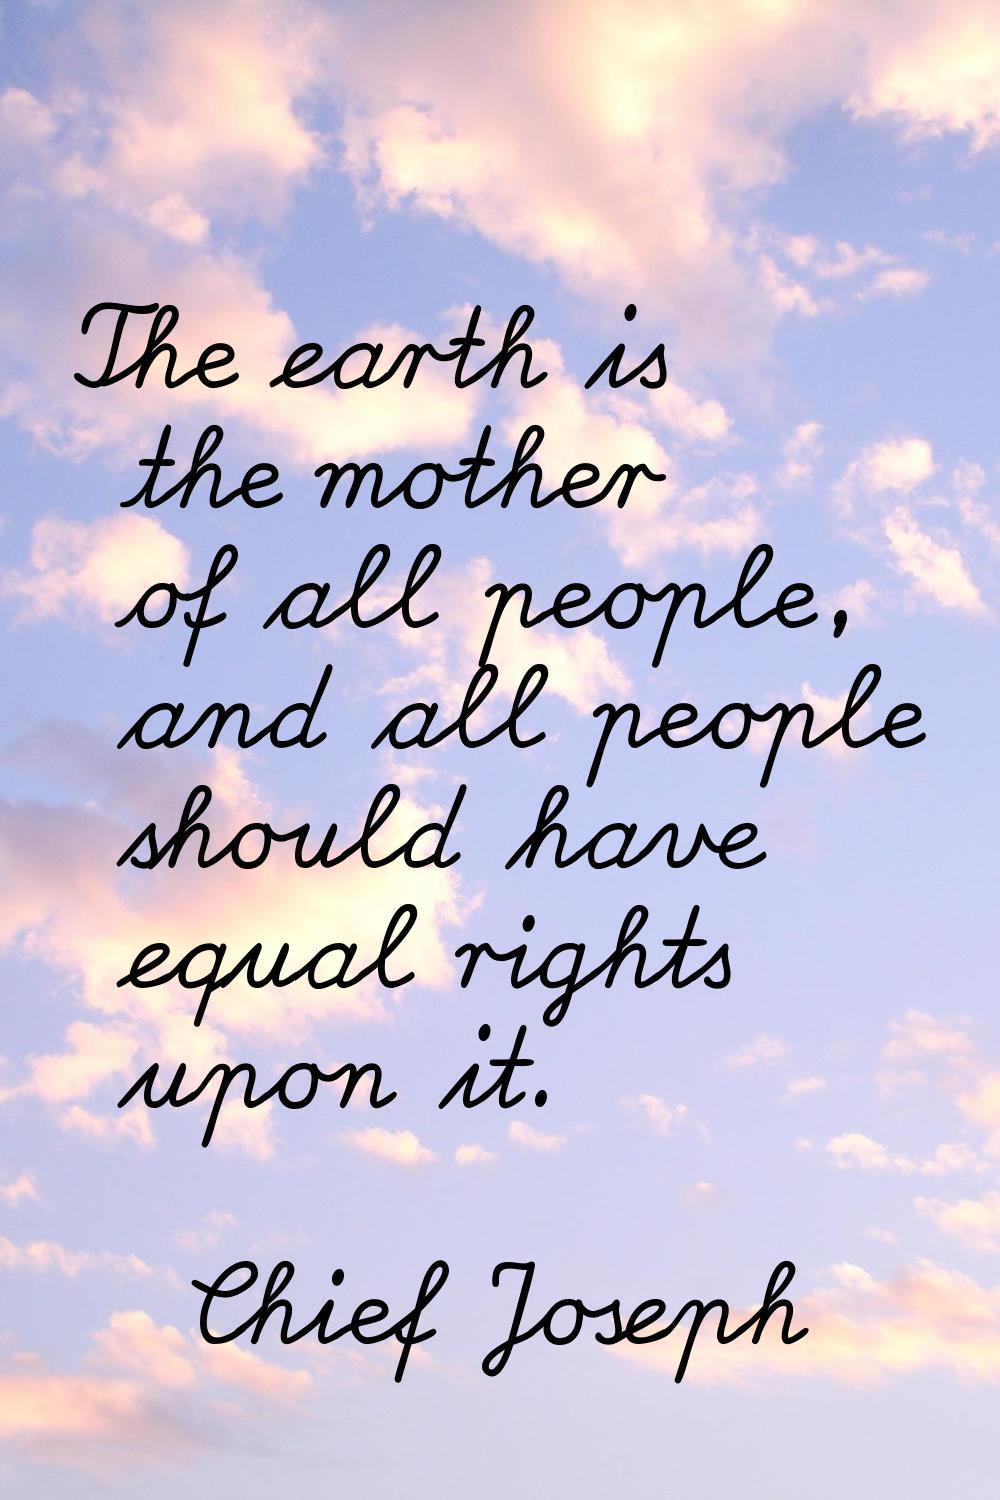 The earth is the mother of all people, and all people should have equal rights upon it.